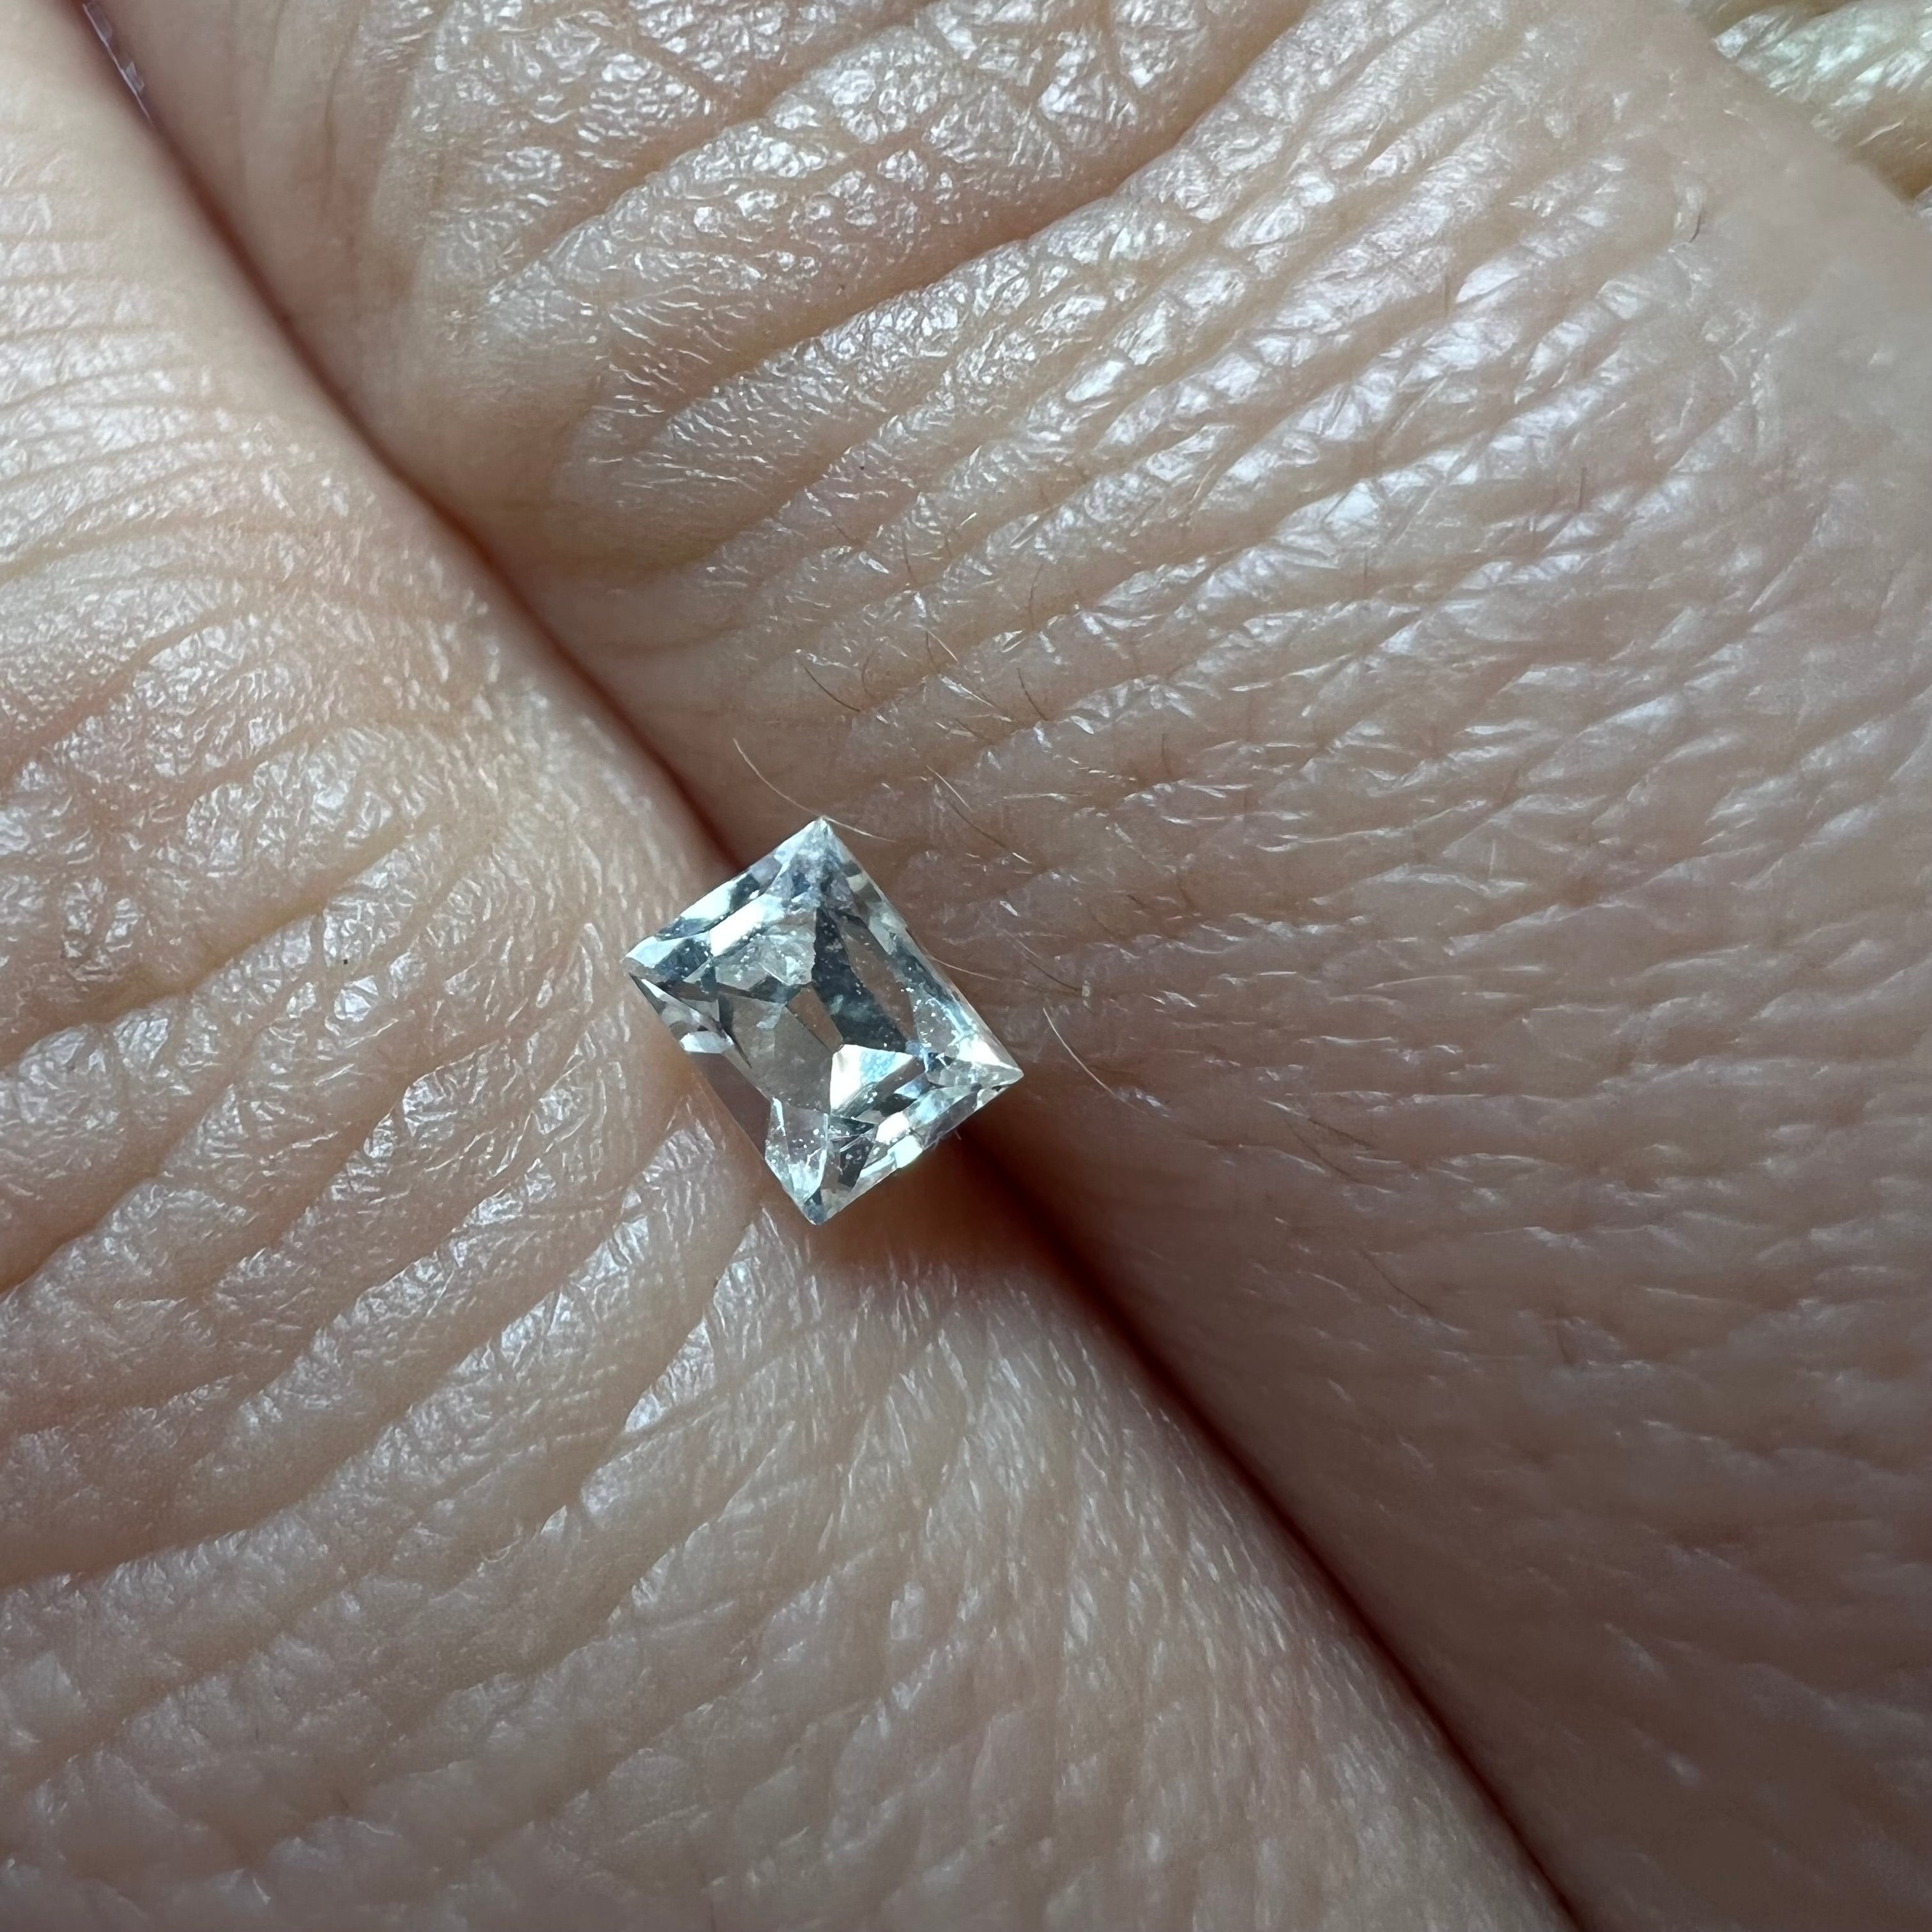 .32CT French Cut Diamond K I1 4.33x3.43x2.30mm Natural Earth mined